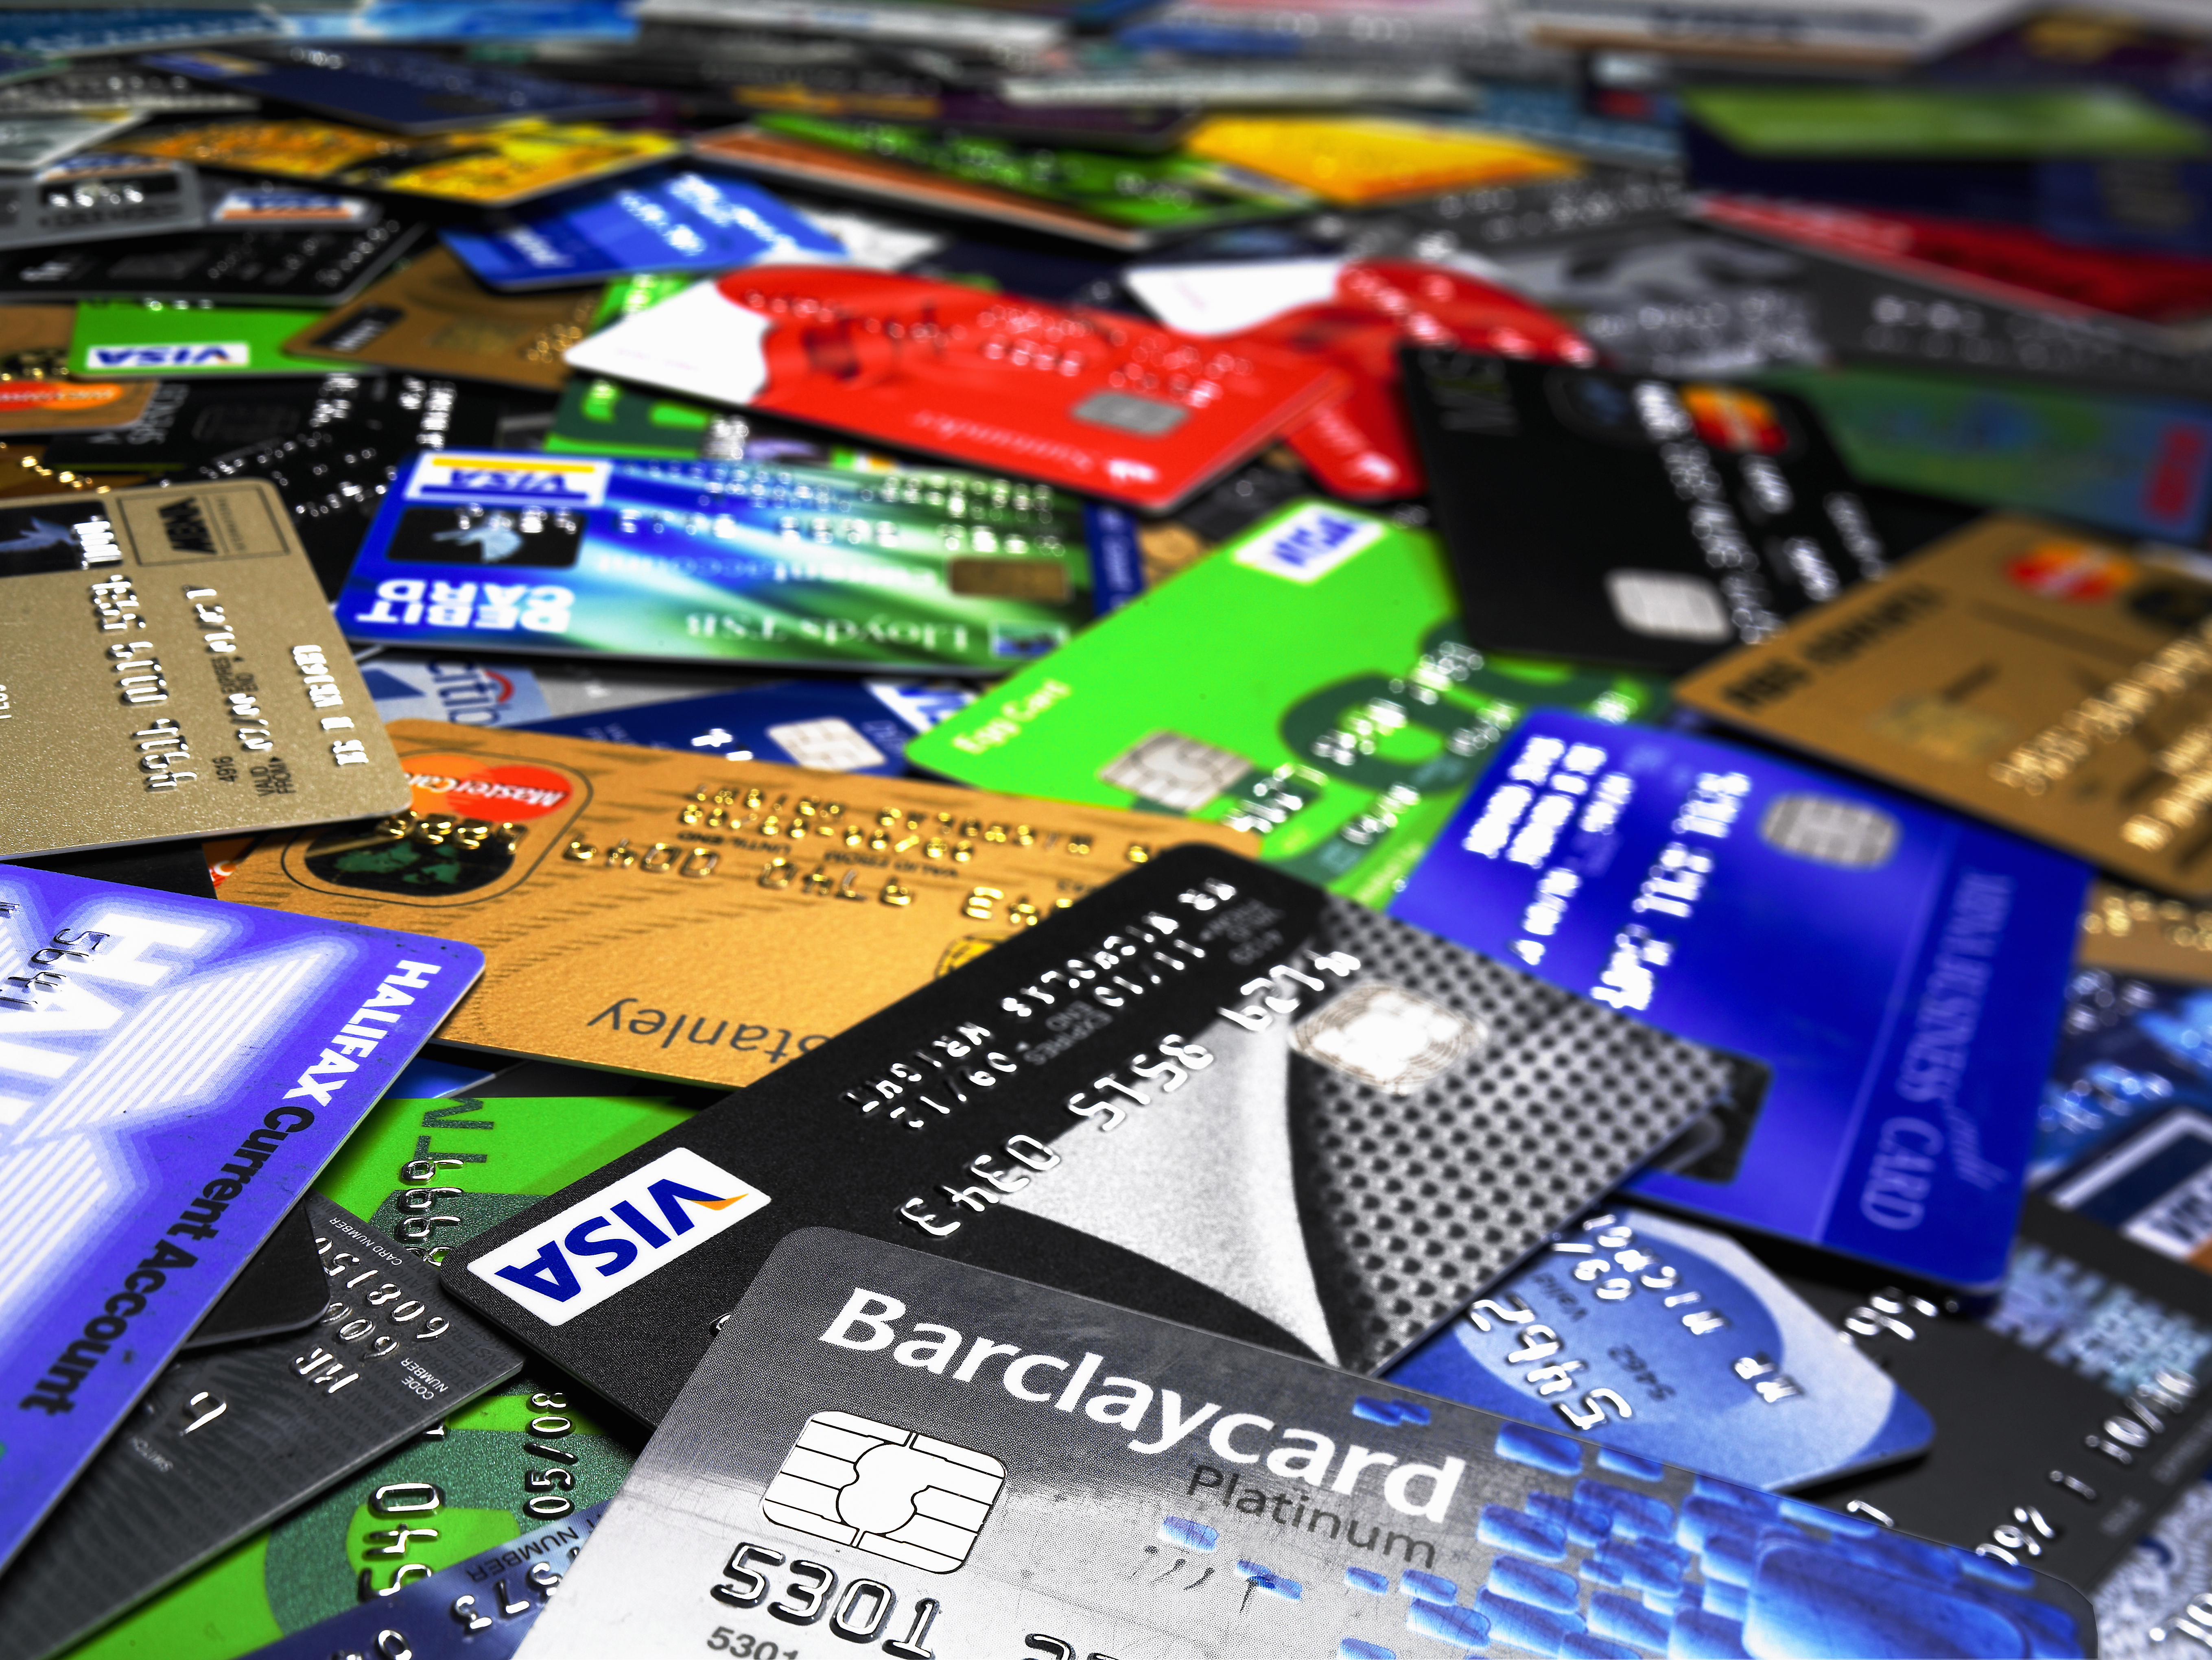 5 Credit Card Hacks That Can Save You Money